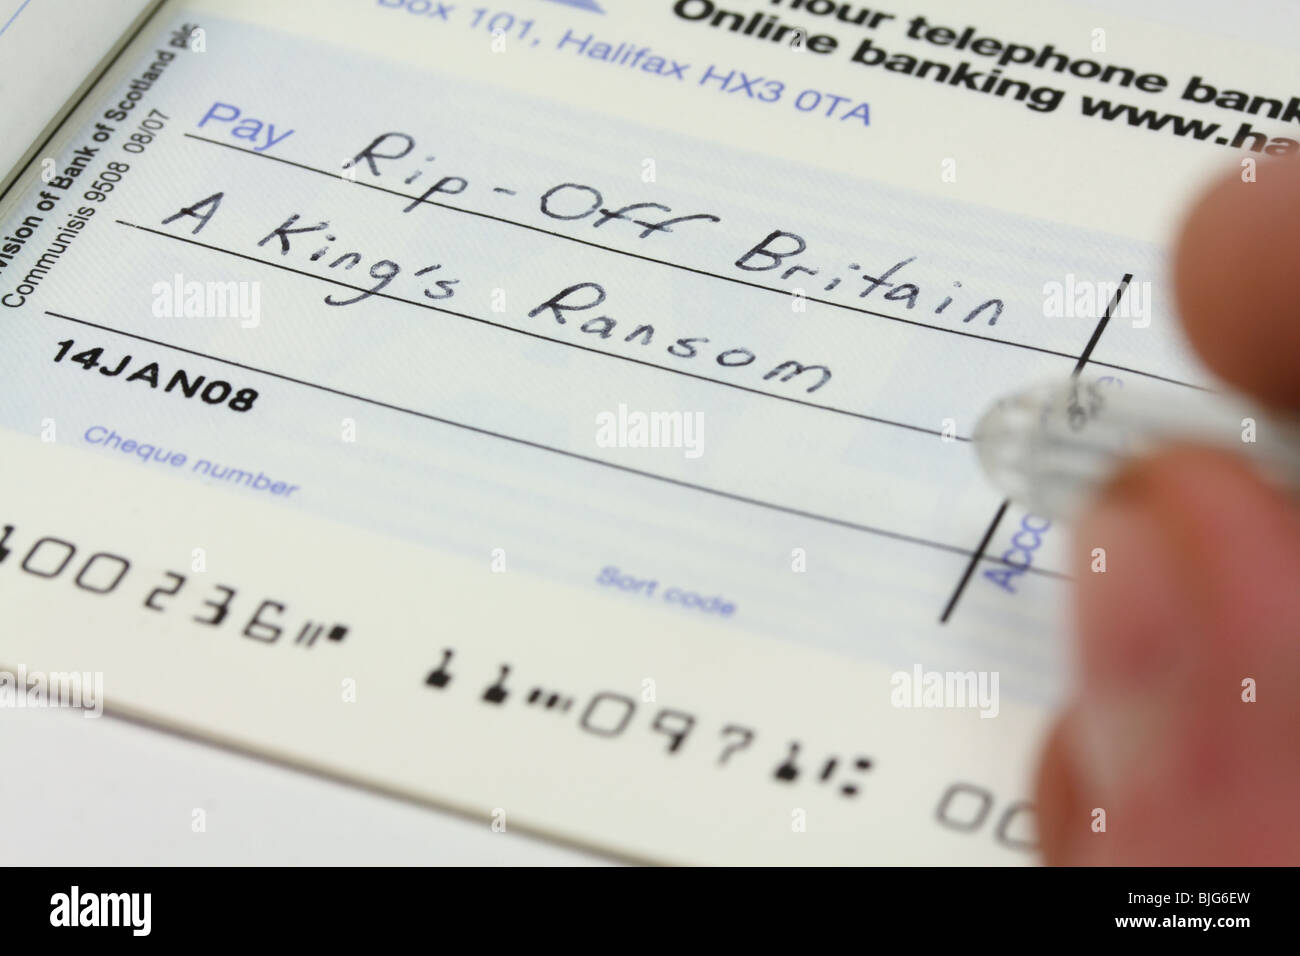 Writing a cheque - 'Rip-off Britain' concept Stock Photo